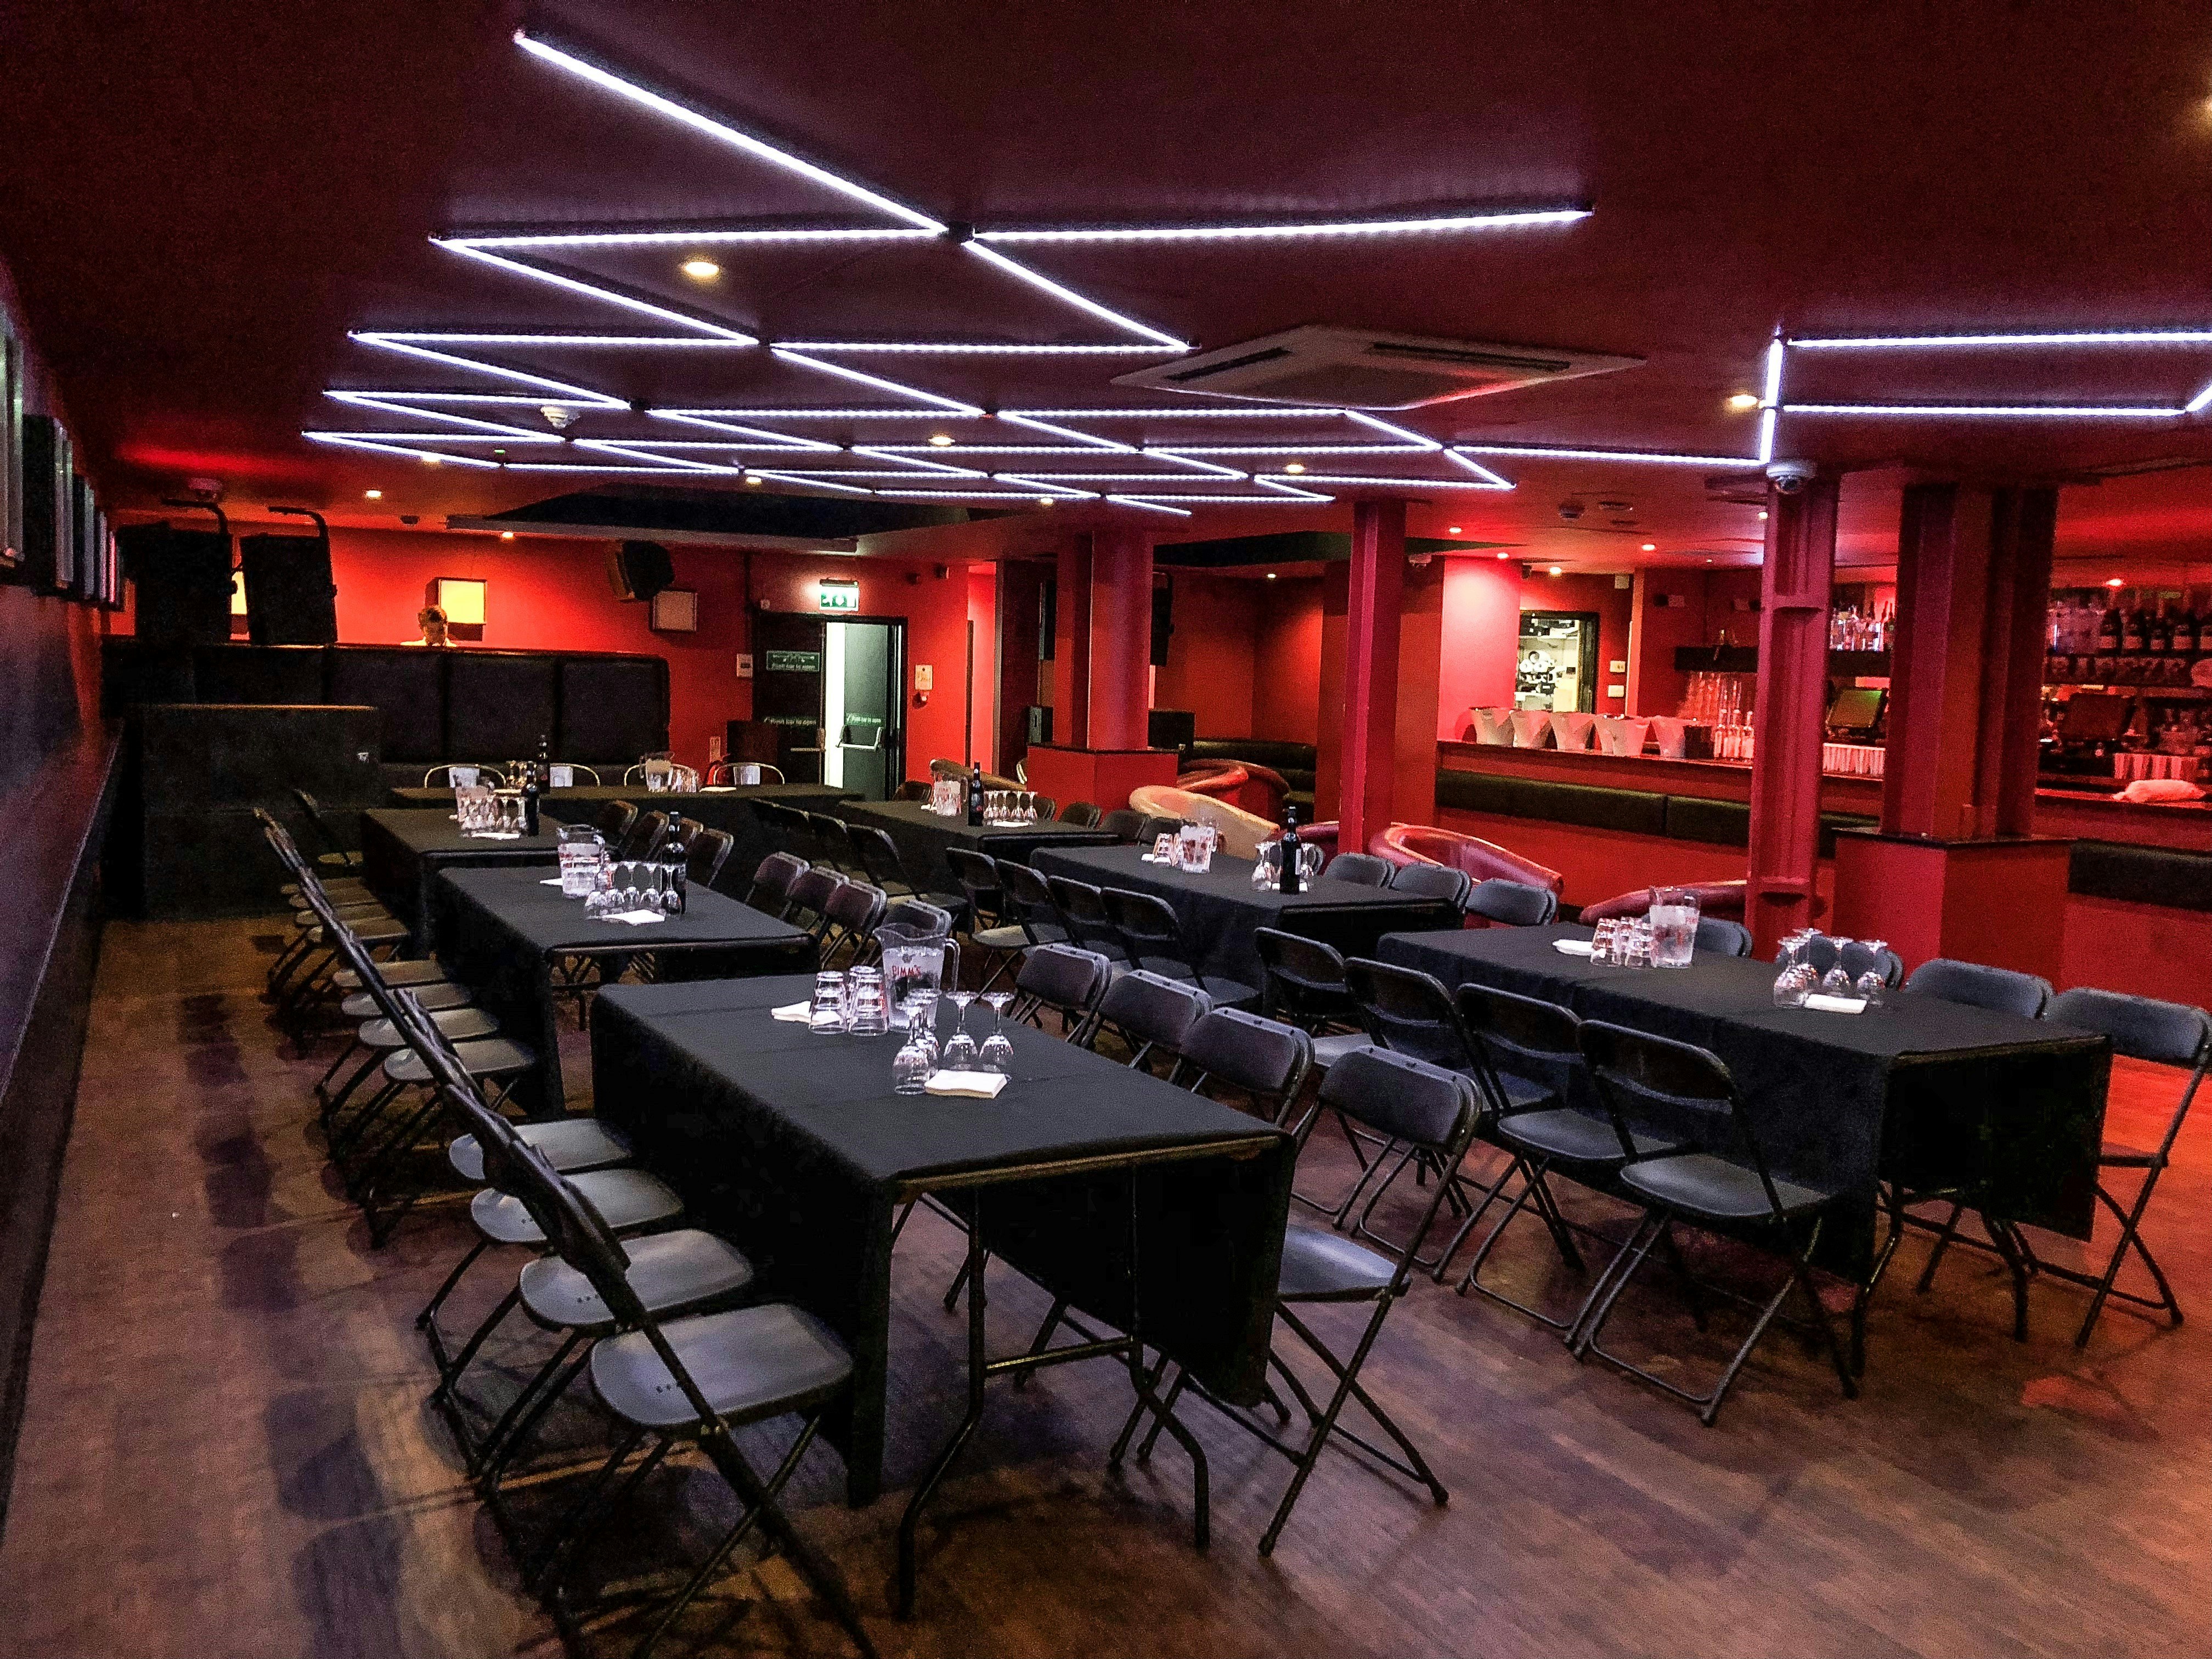 Basement Venues in London - Trapeze Bar - Events in The Basement Club - Banner